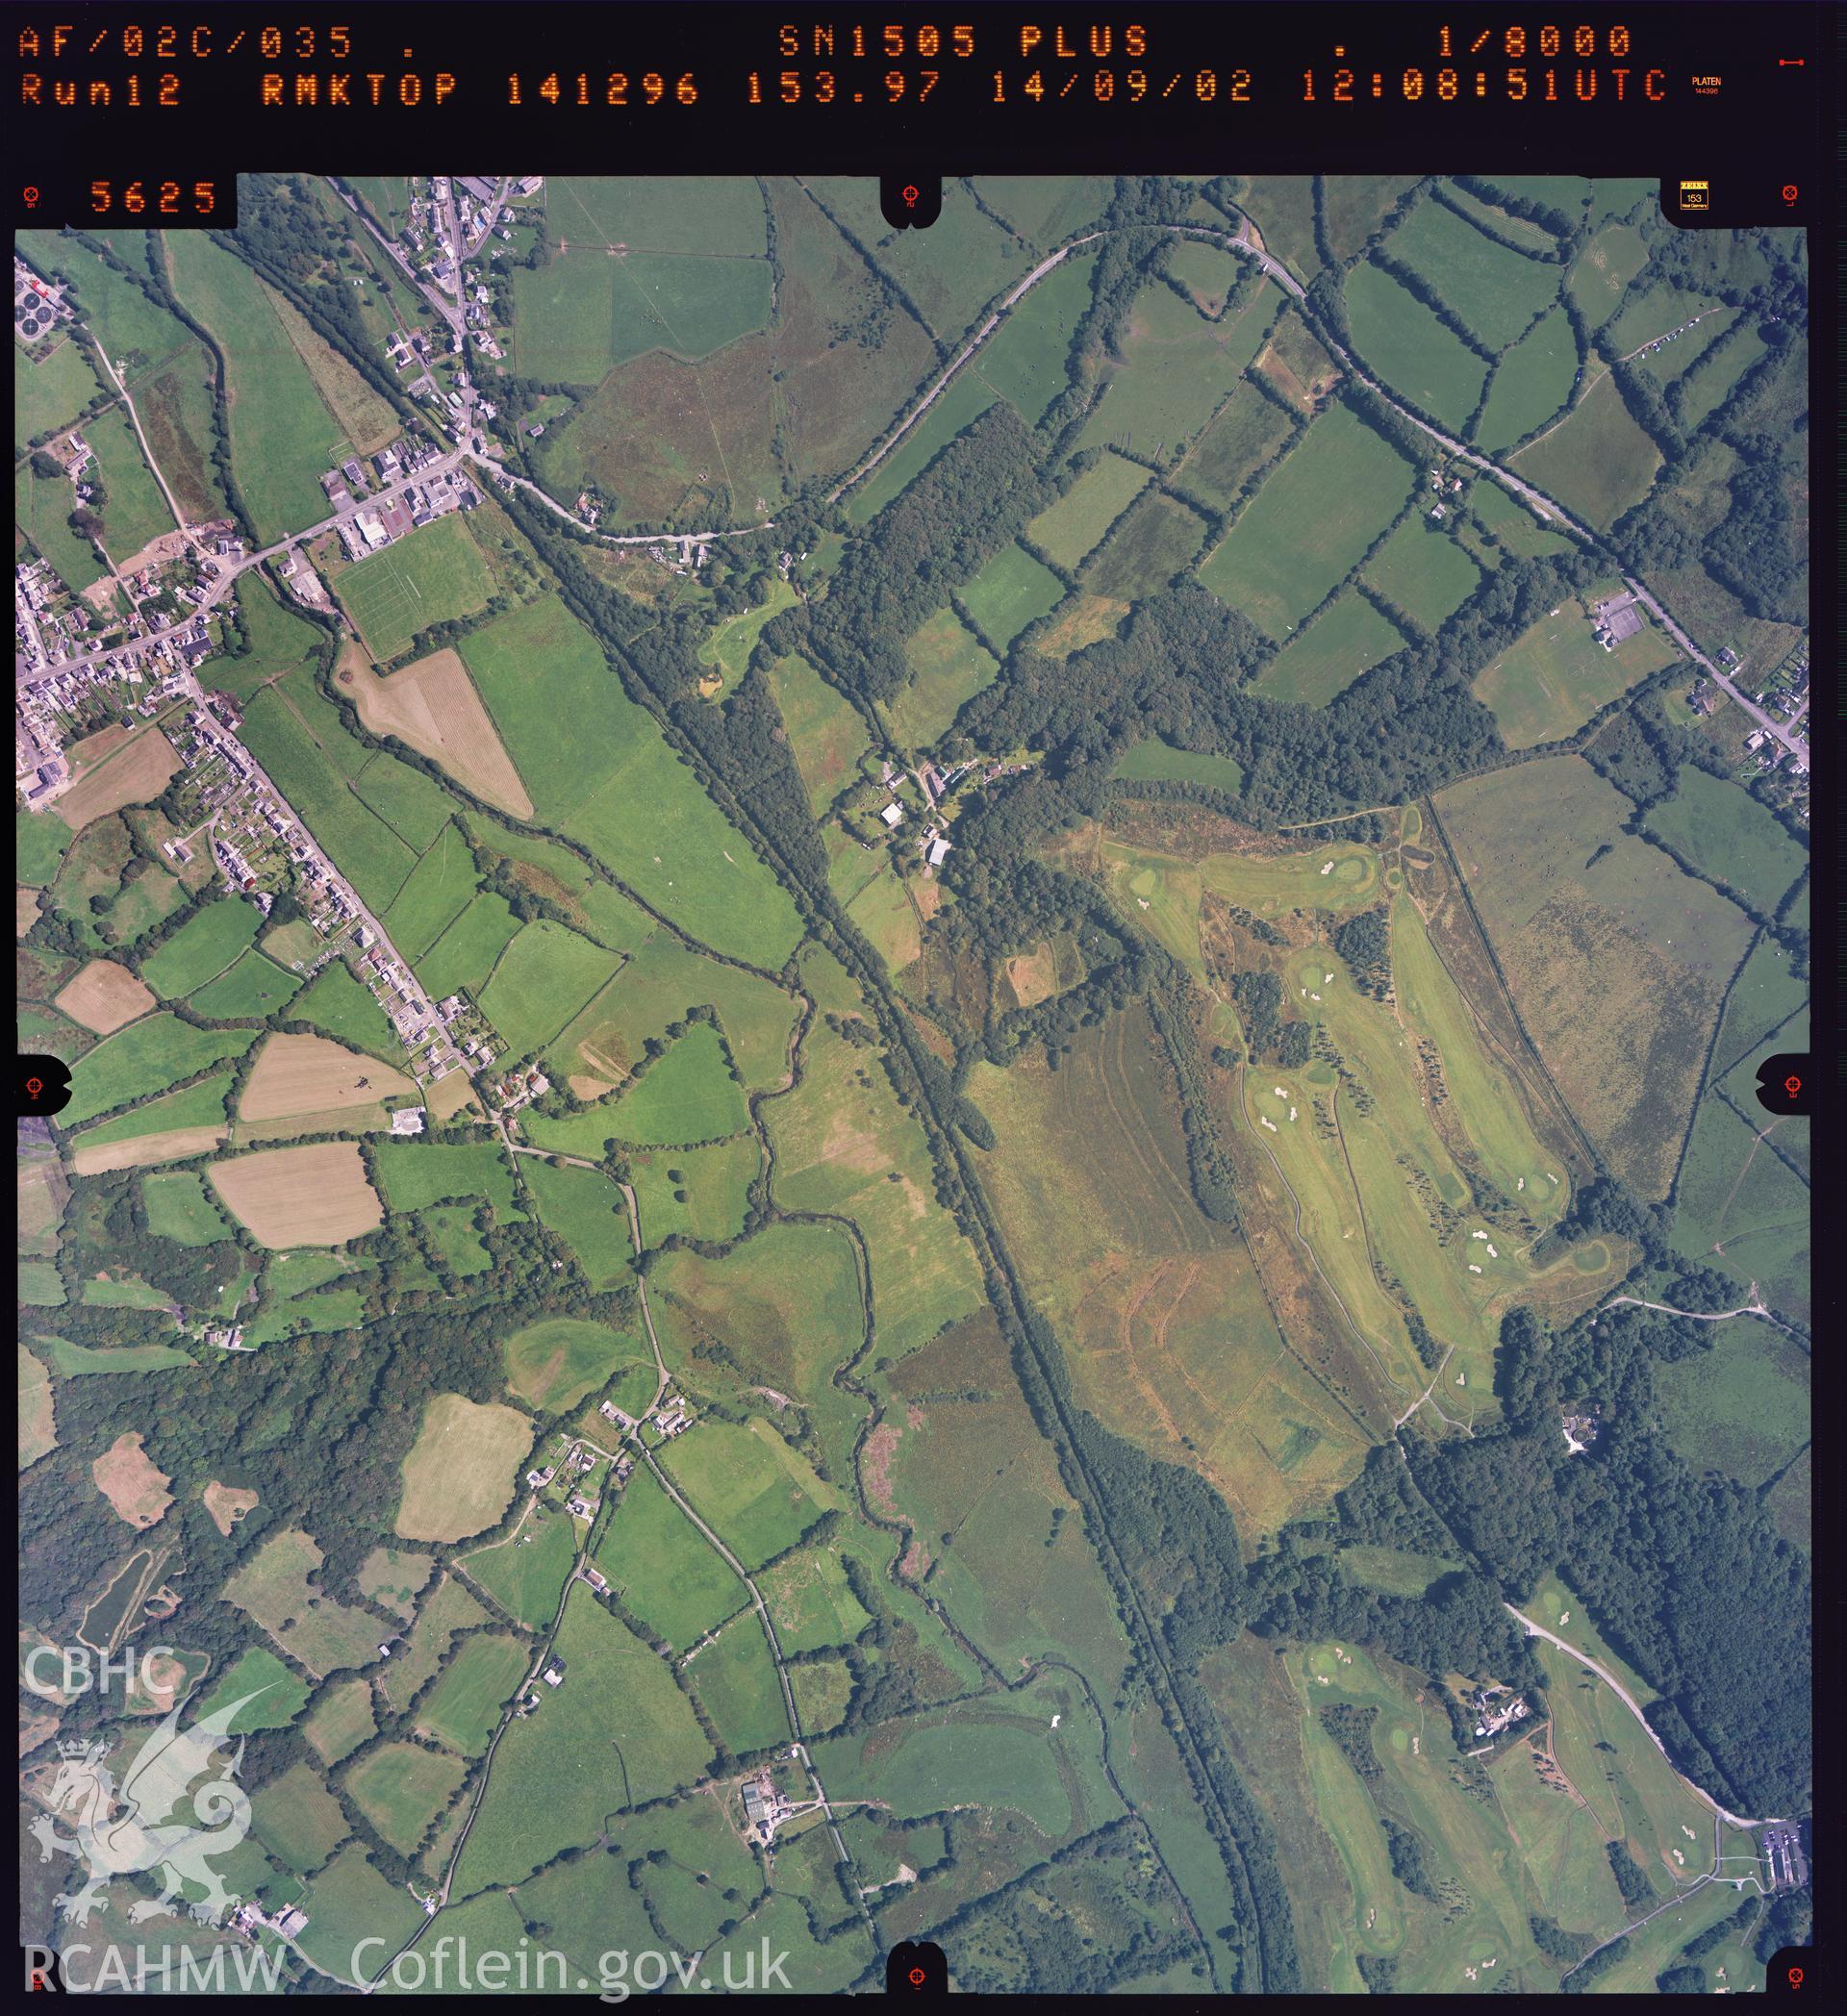 Digitized copy of a colour aerial photograph showing the Pontyates area, taken by Ordnance Survey, 2002.